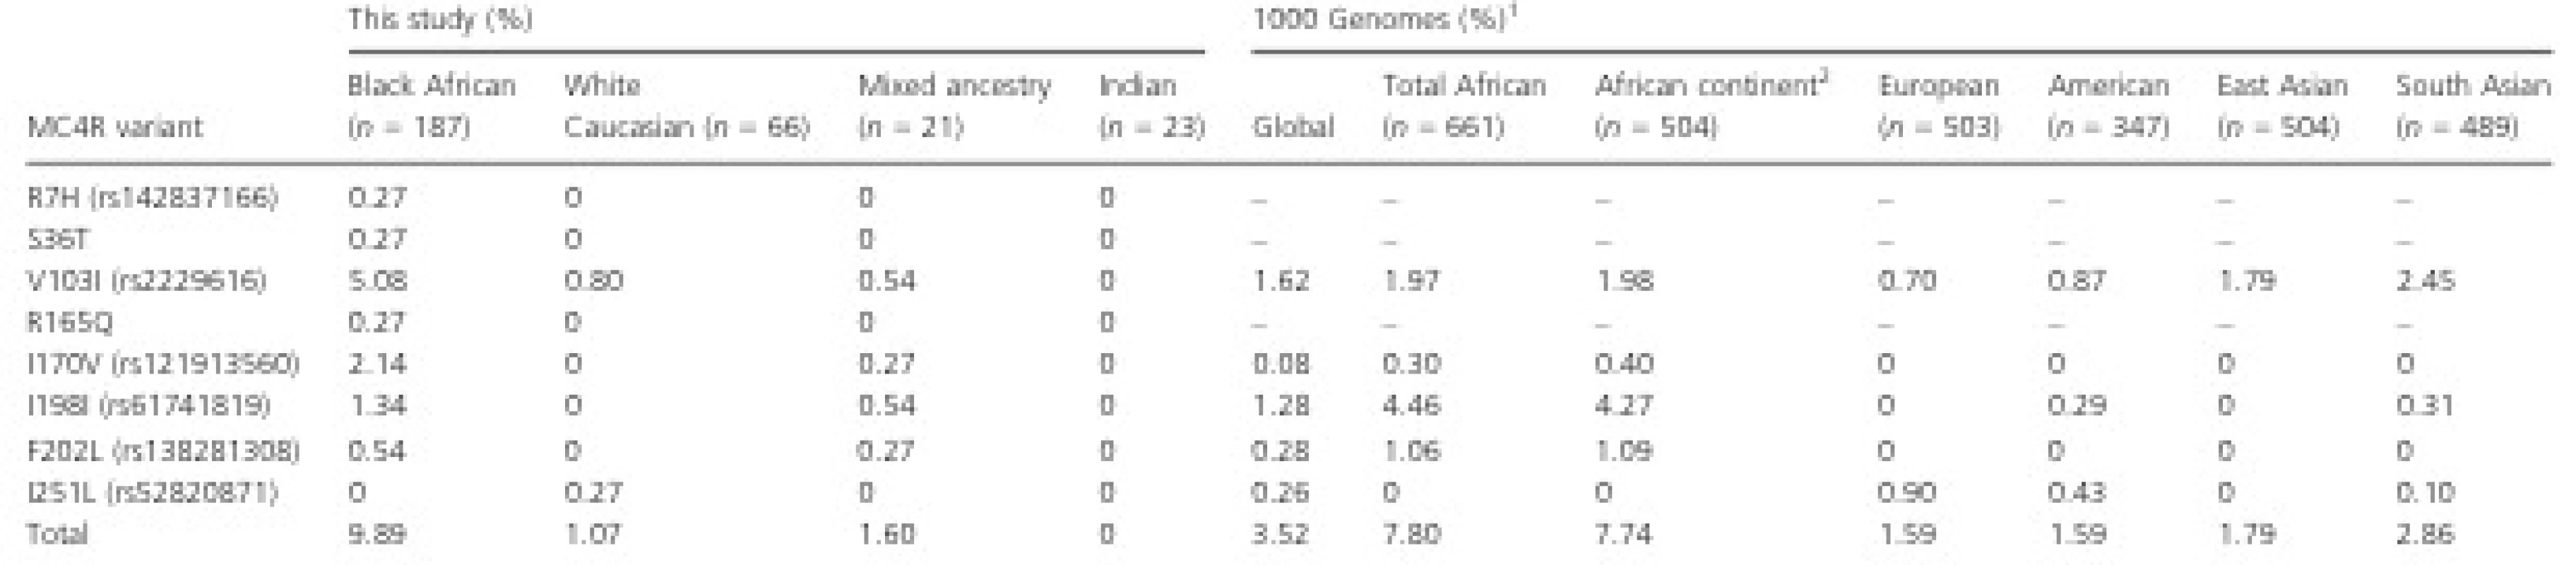 MC4R allelic frequencies according to this study population and from the 1000 Genomes Project.